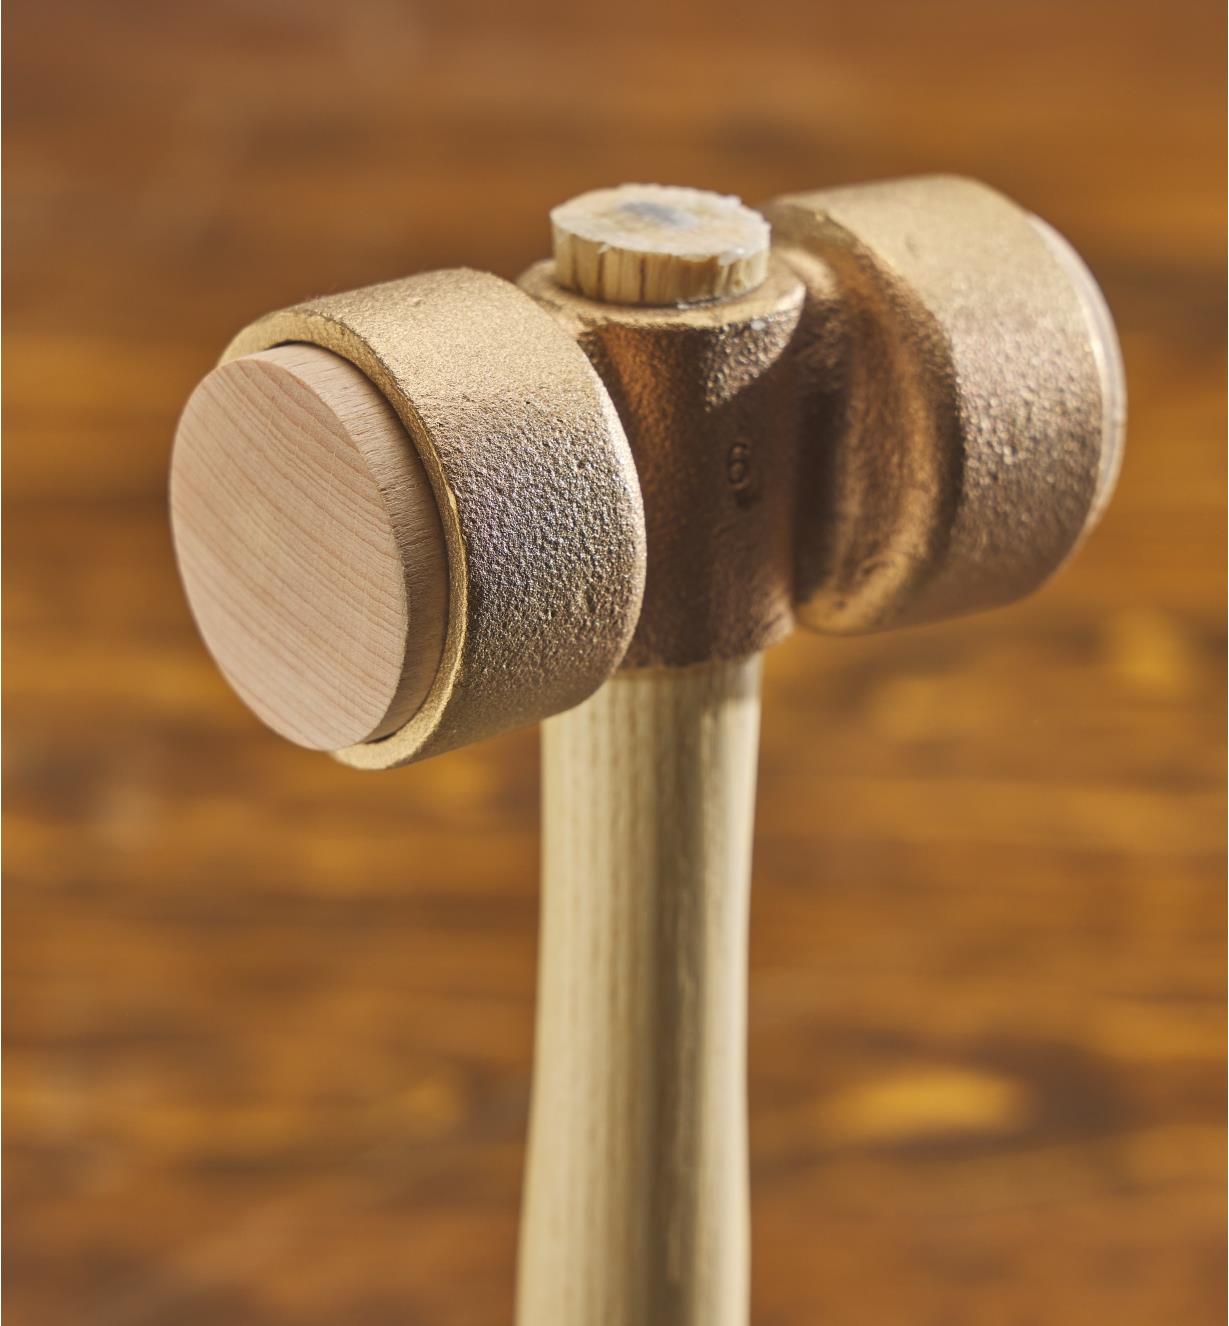 The head of the Veritas Cabinetmaker's Mallet, showing one of the striking faces